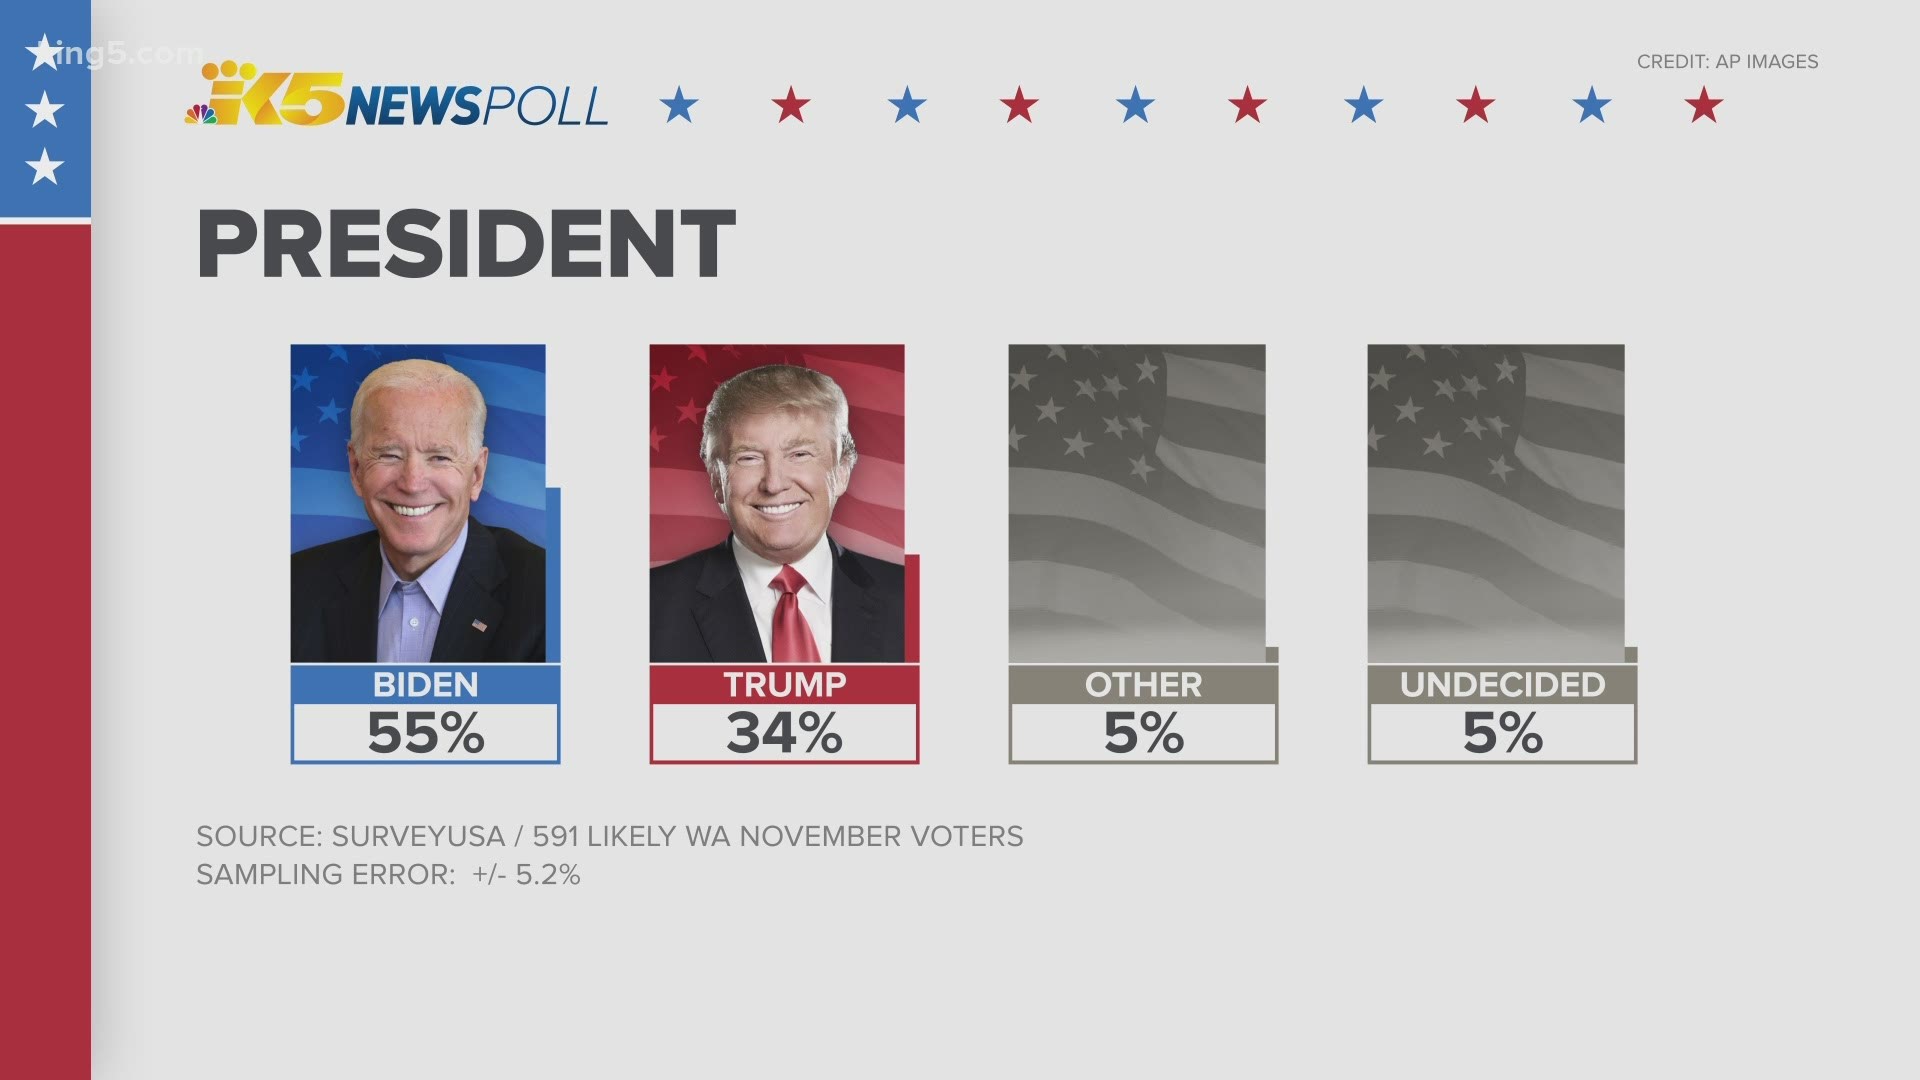 An exclusive KING 5 News poll found 34% of likely Washington voters plan to vote for President Donald Trump, and 55% plan to vote for challenger Joe Biden.